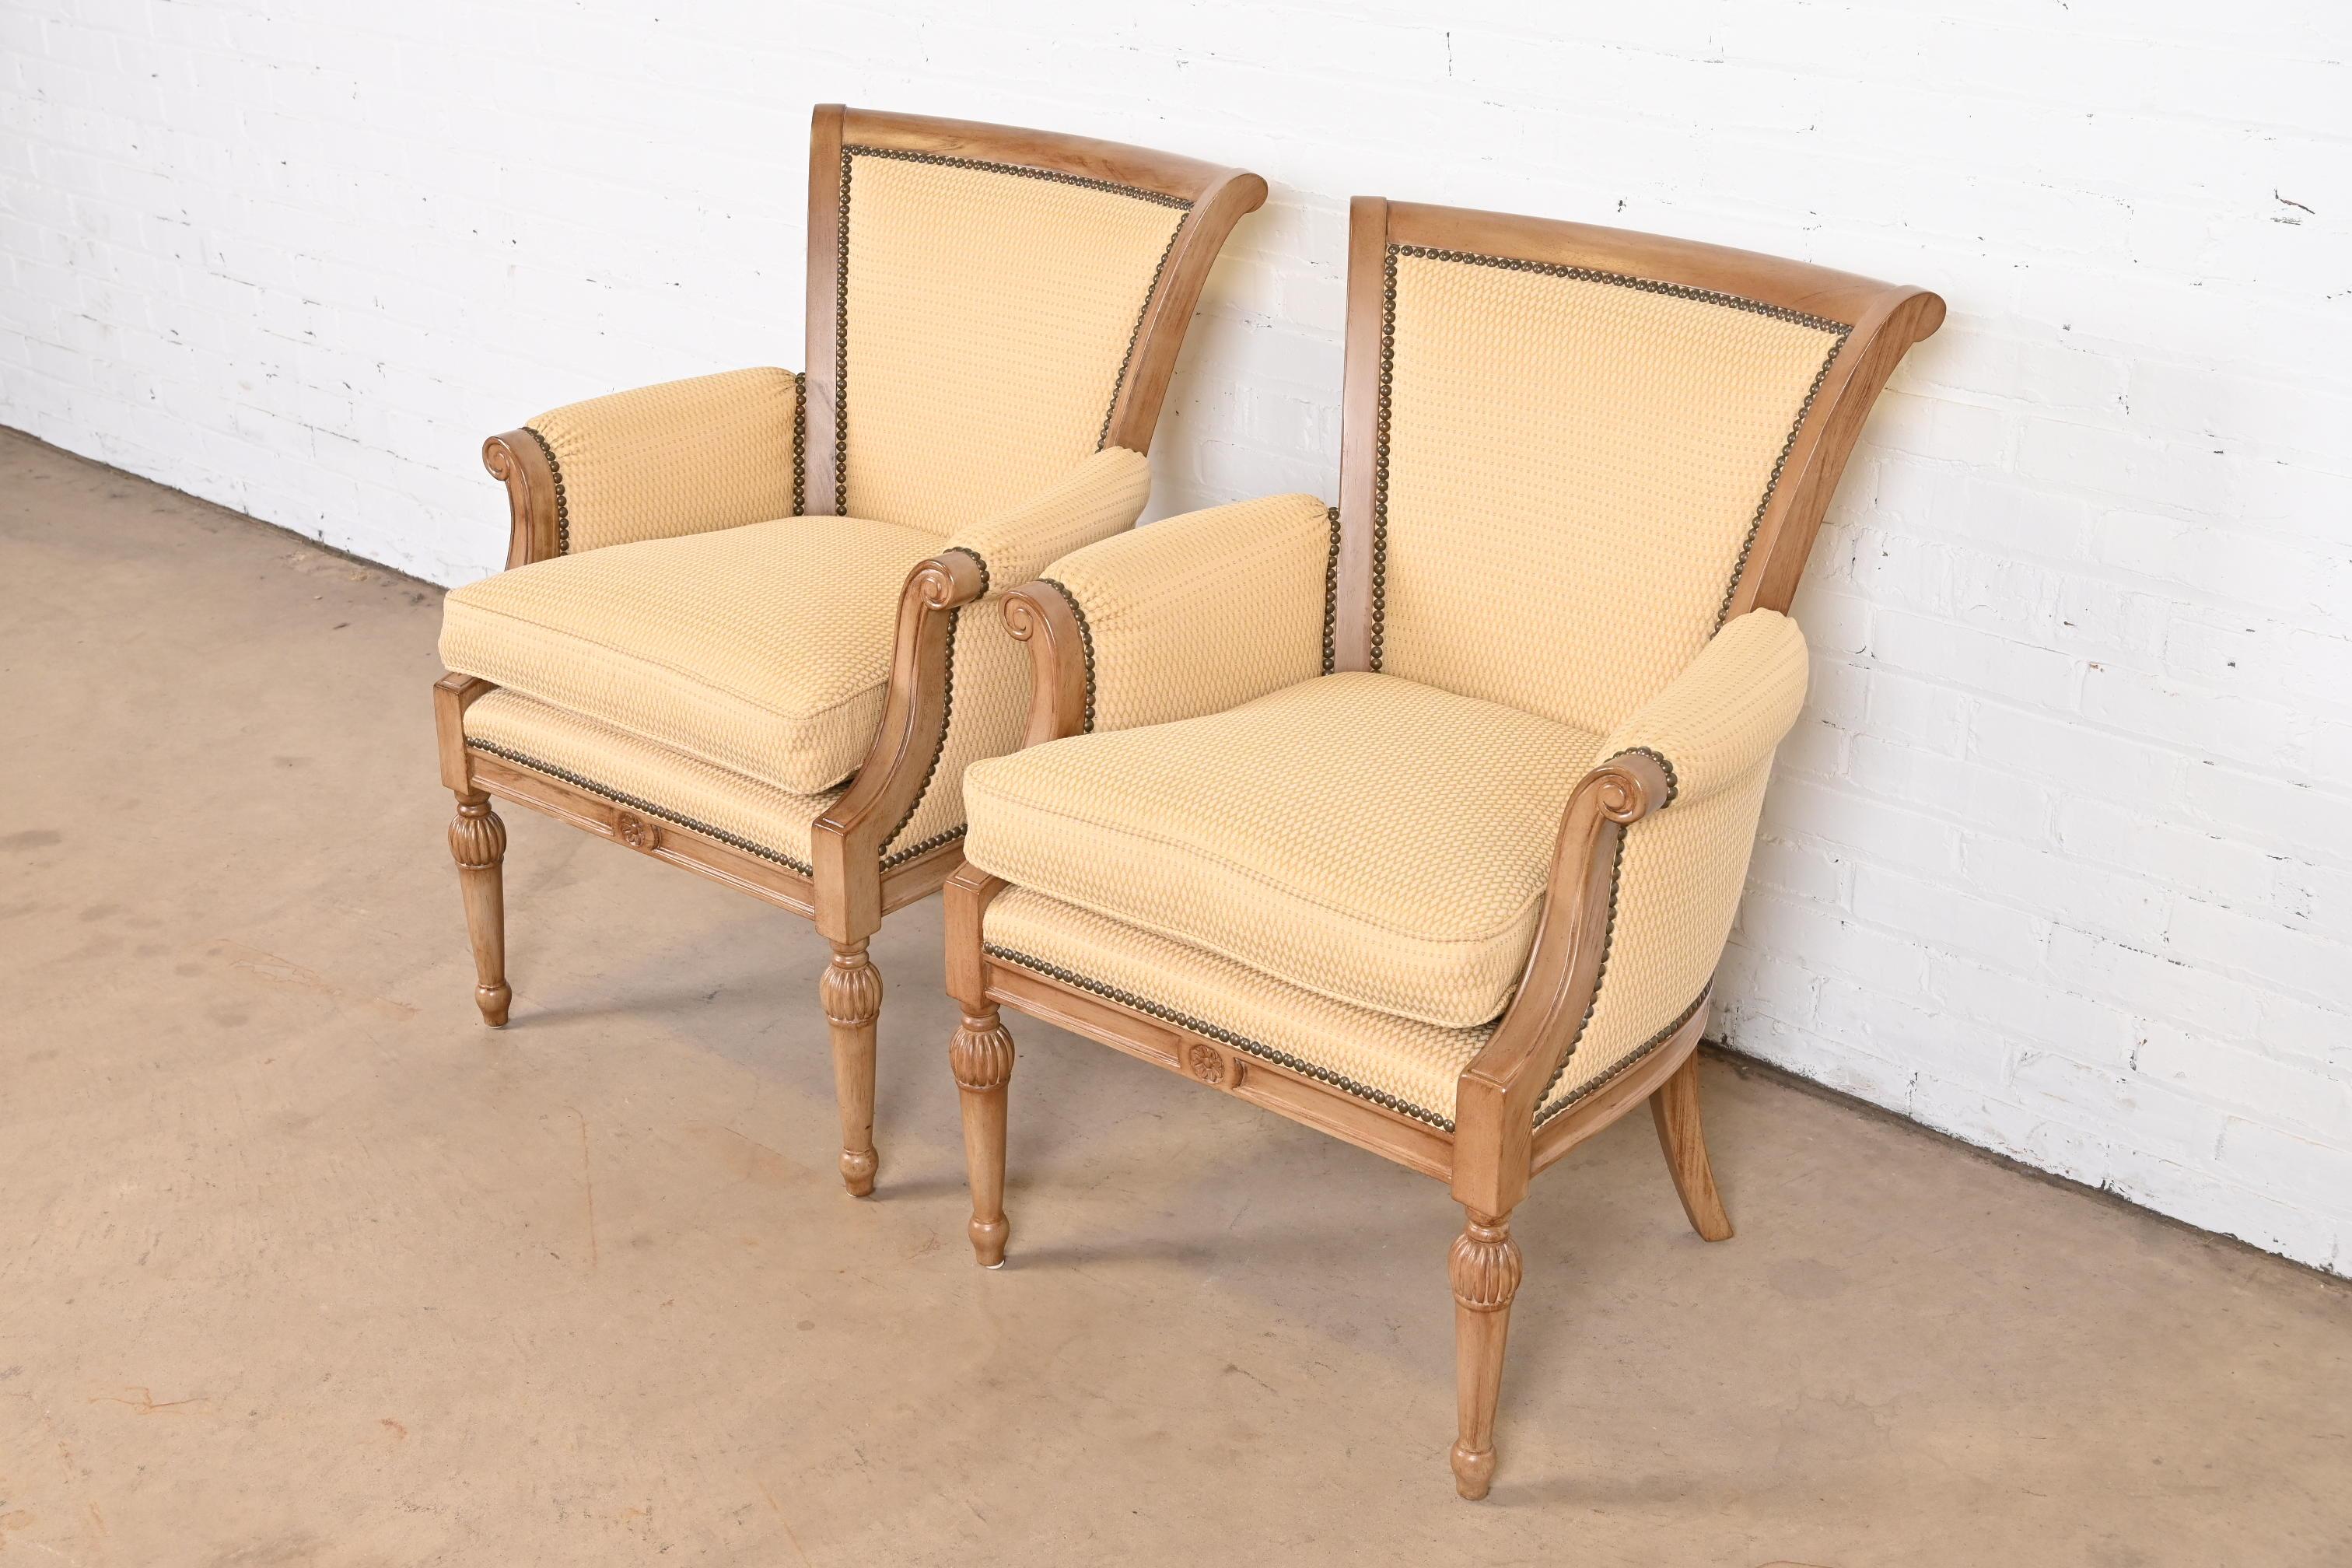 American Barbara Barry for Henredon French Regency Louis XVI Bergere Chairs, Pair For Sale